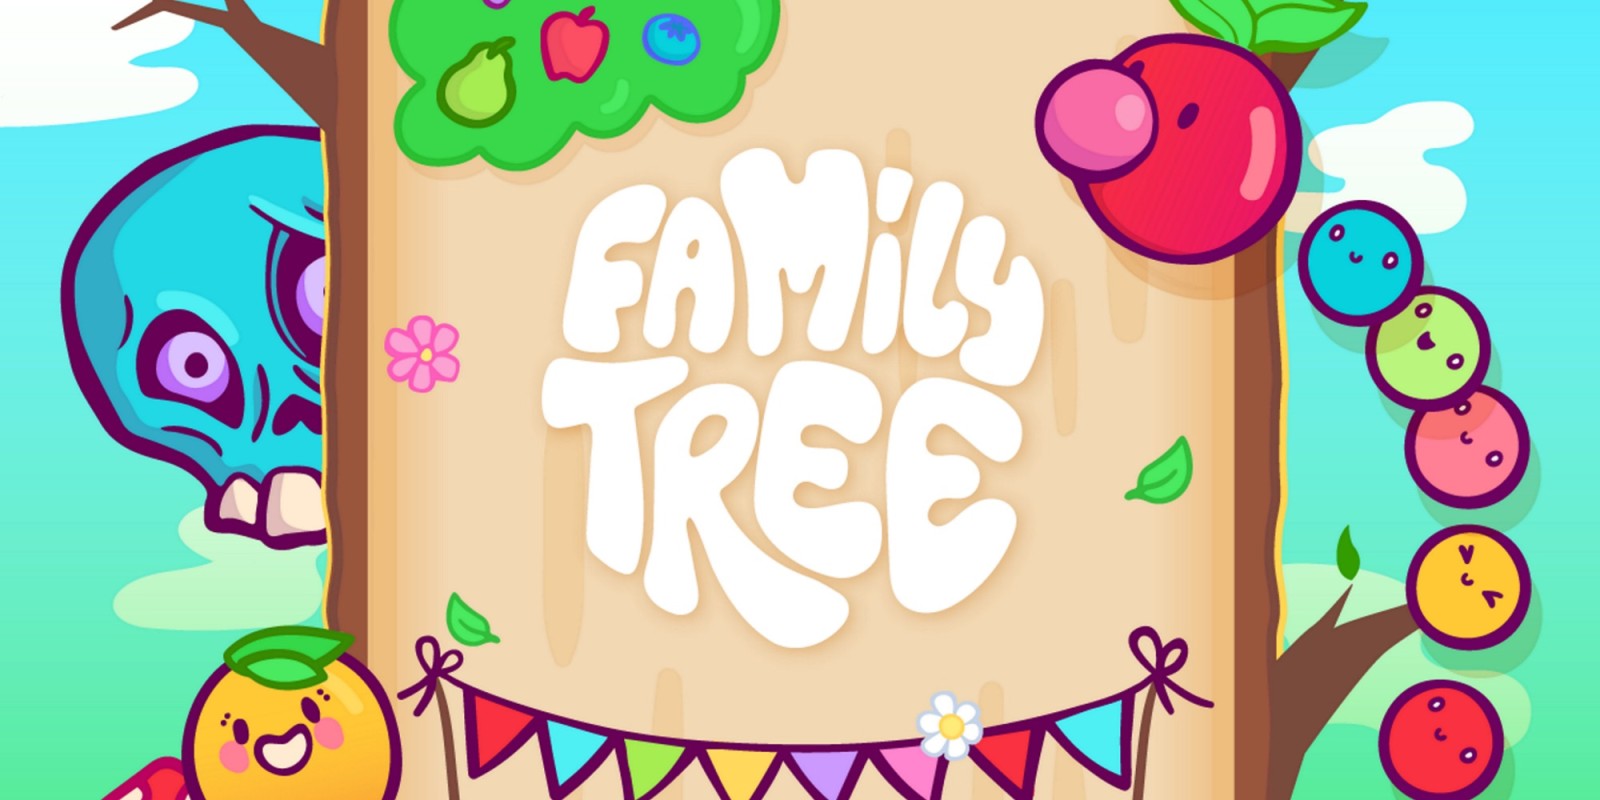 download free the first tree nintendo switch